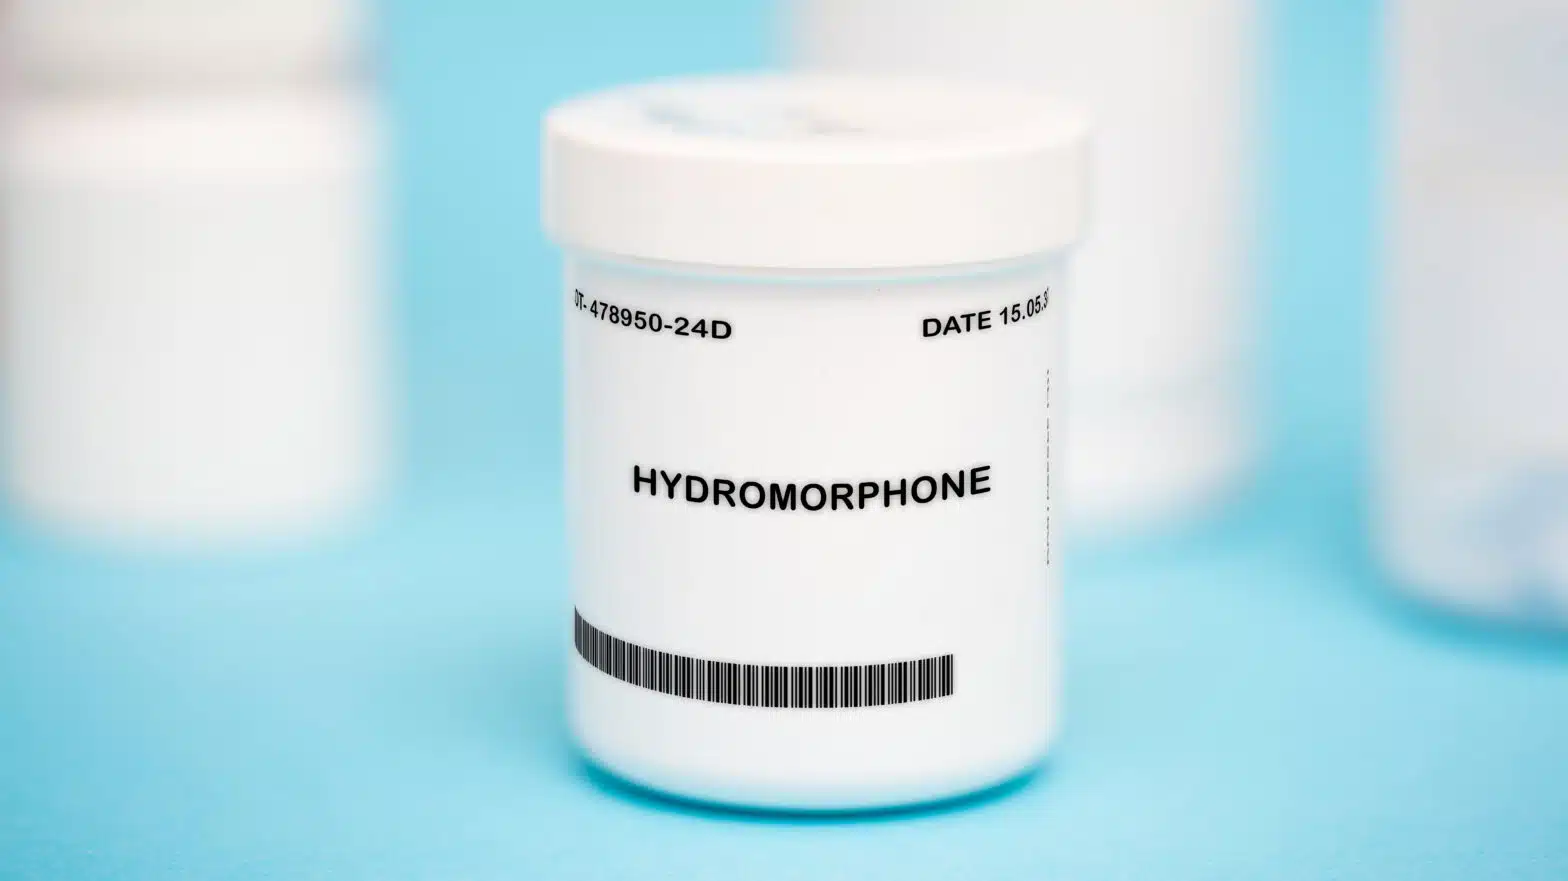 A white bottle with a label that reads "Hydromorphone" - Hydromorphone Addiction & Signs Of Abuse